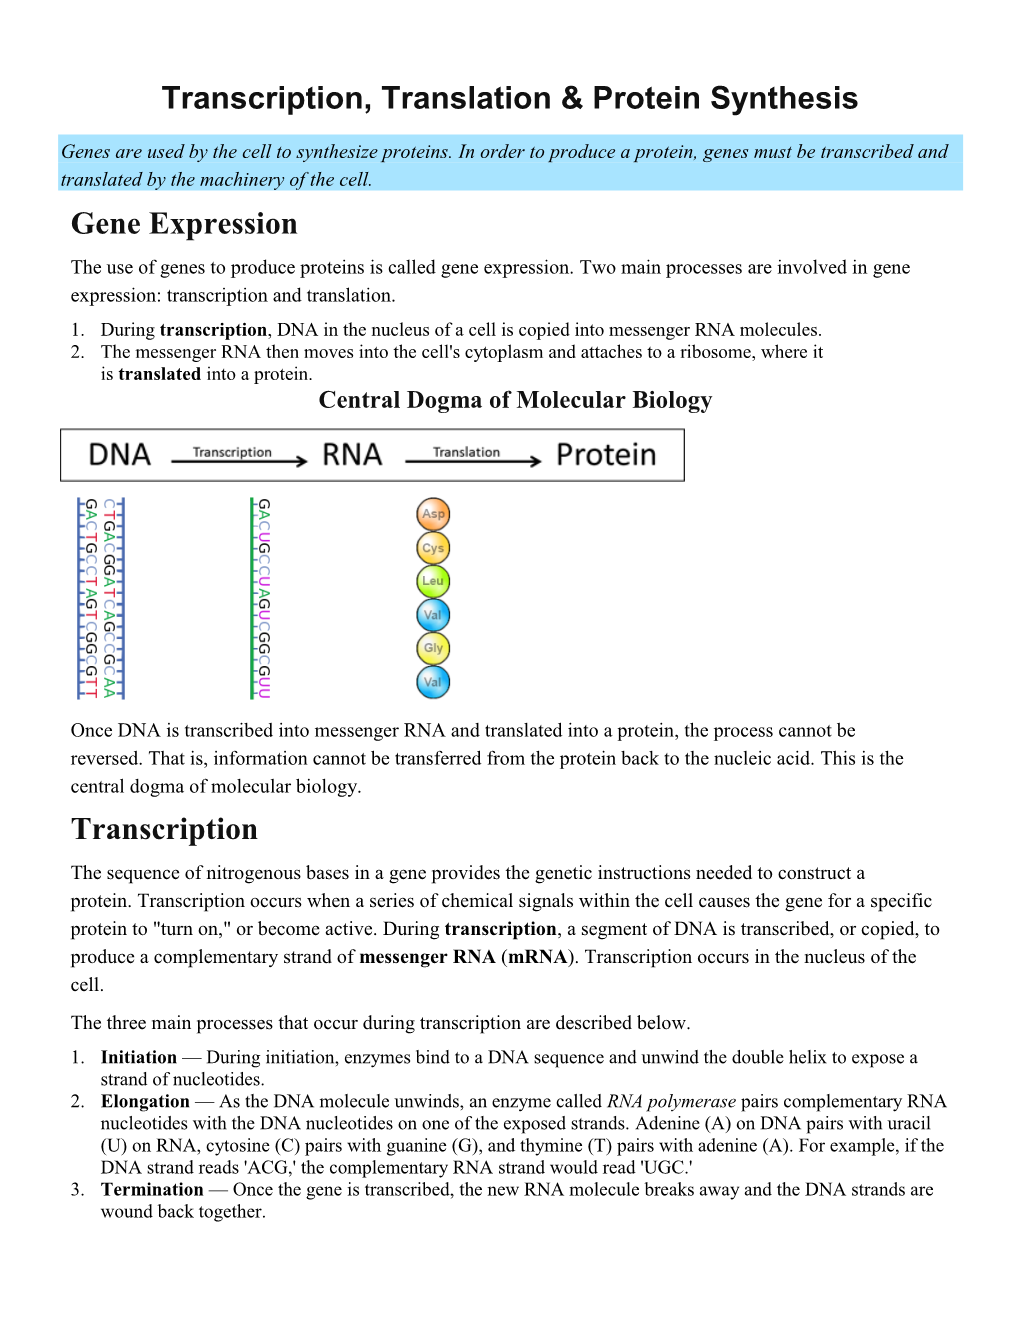 Transcription, Translation & Protein Synthesis Gene Expression